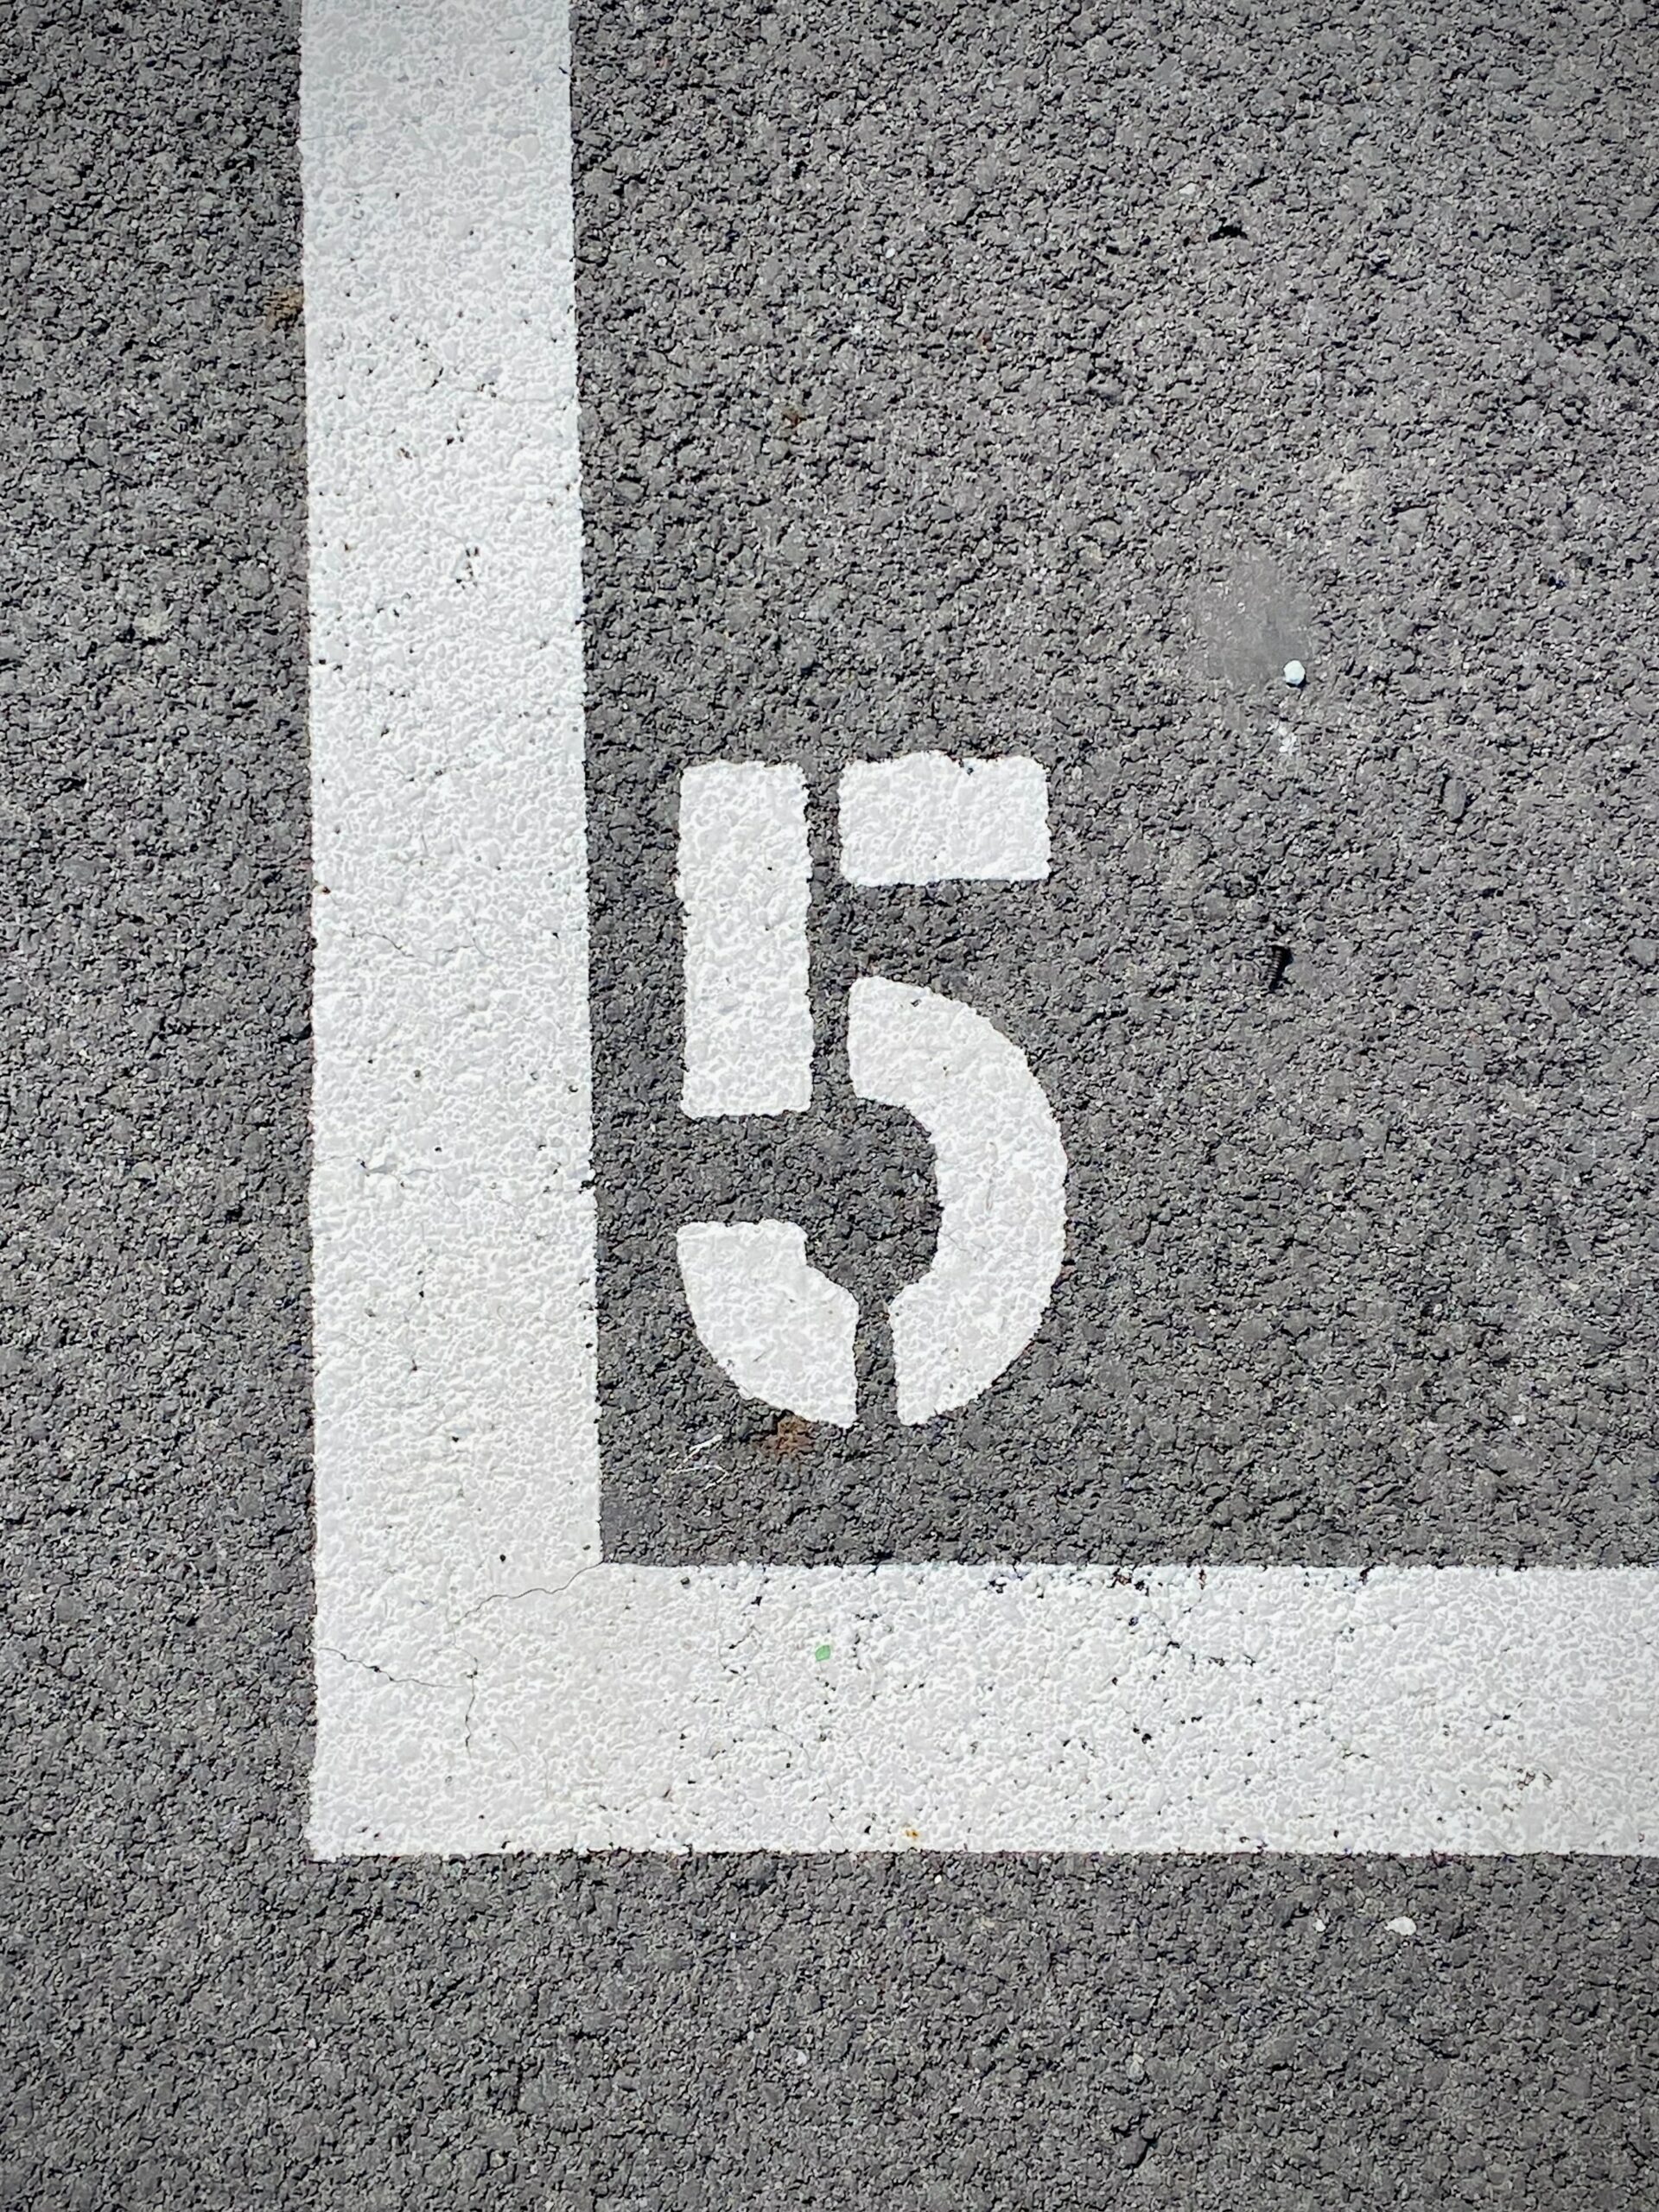 A white number five painted on a concrete road.